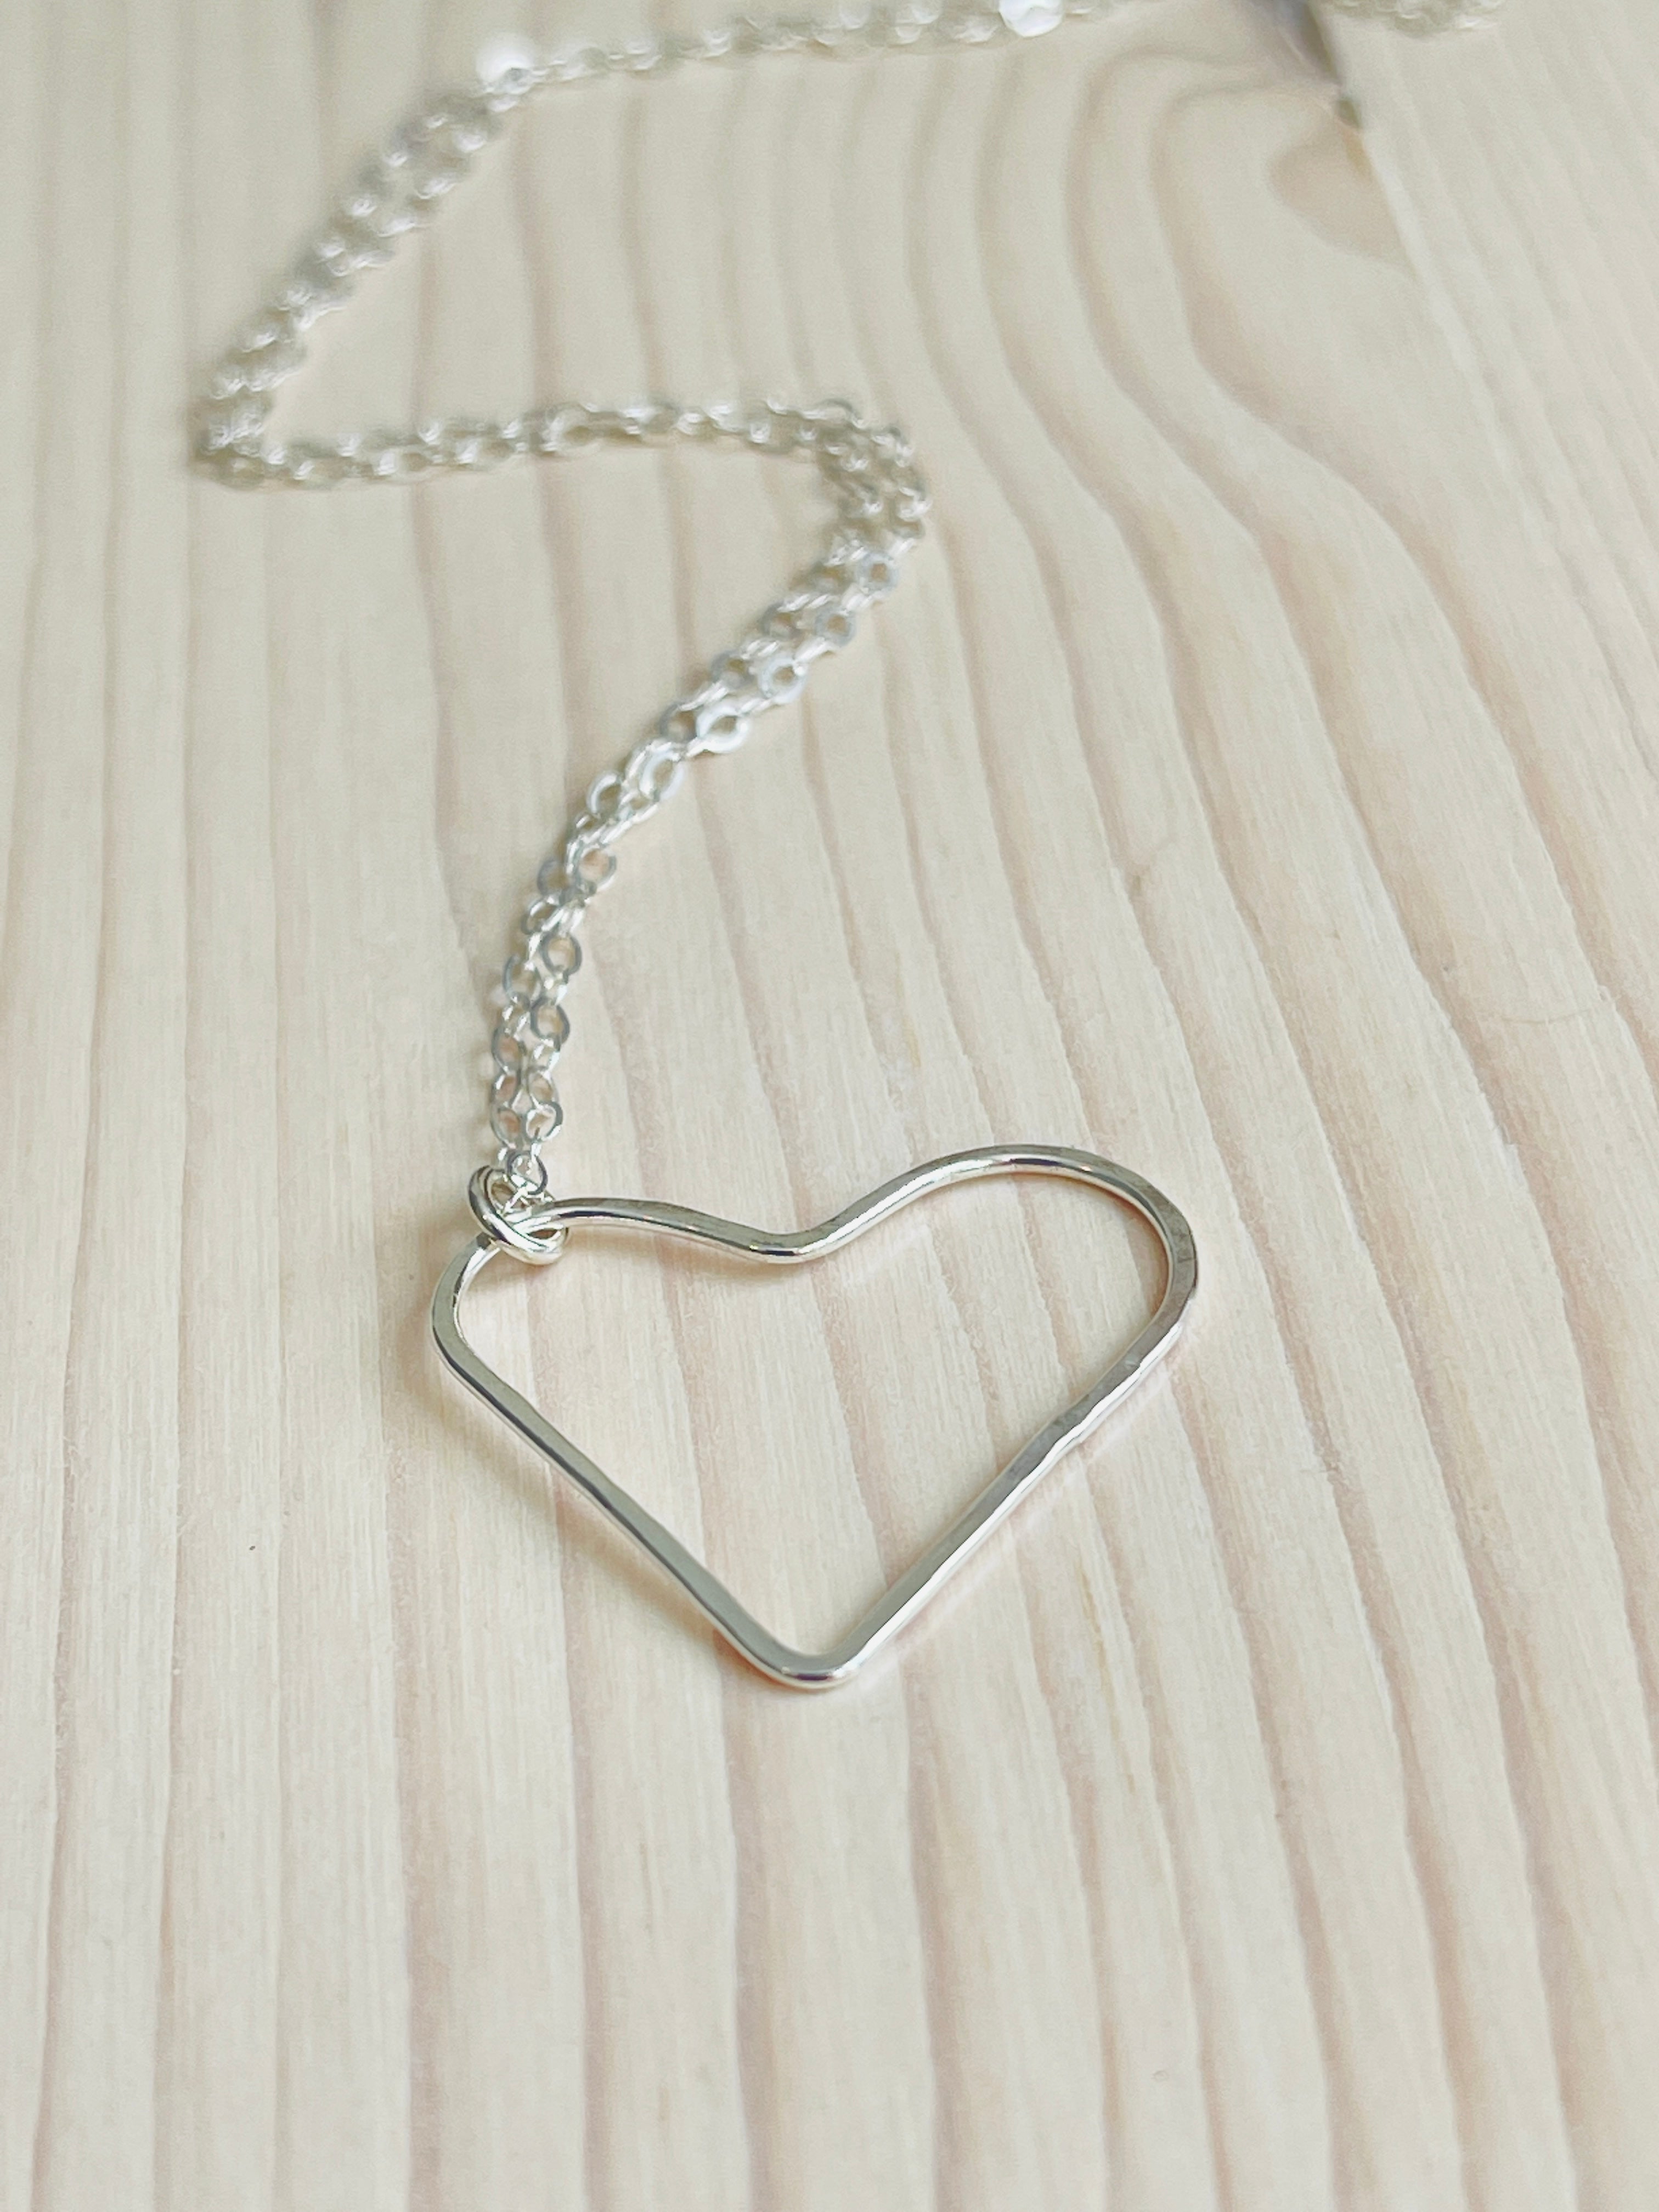 Floating Heart Necklace | Landing Company